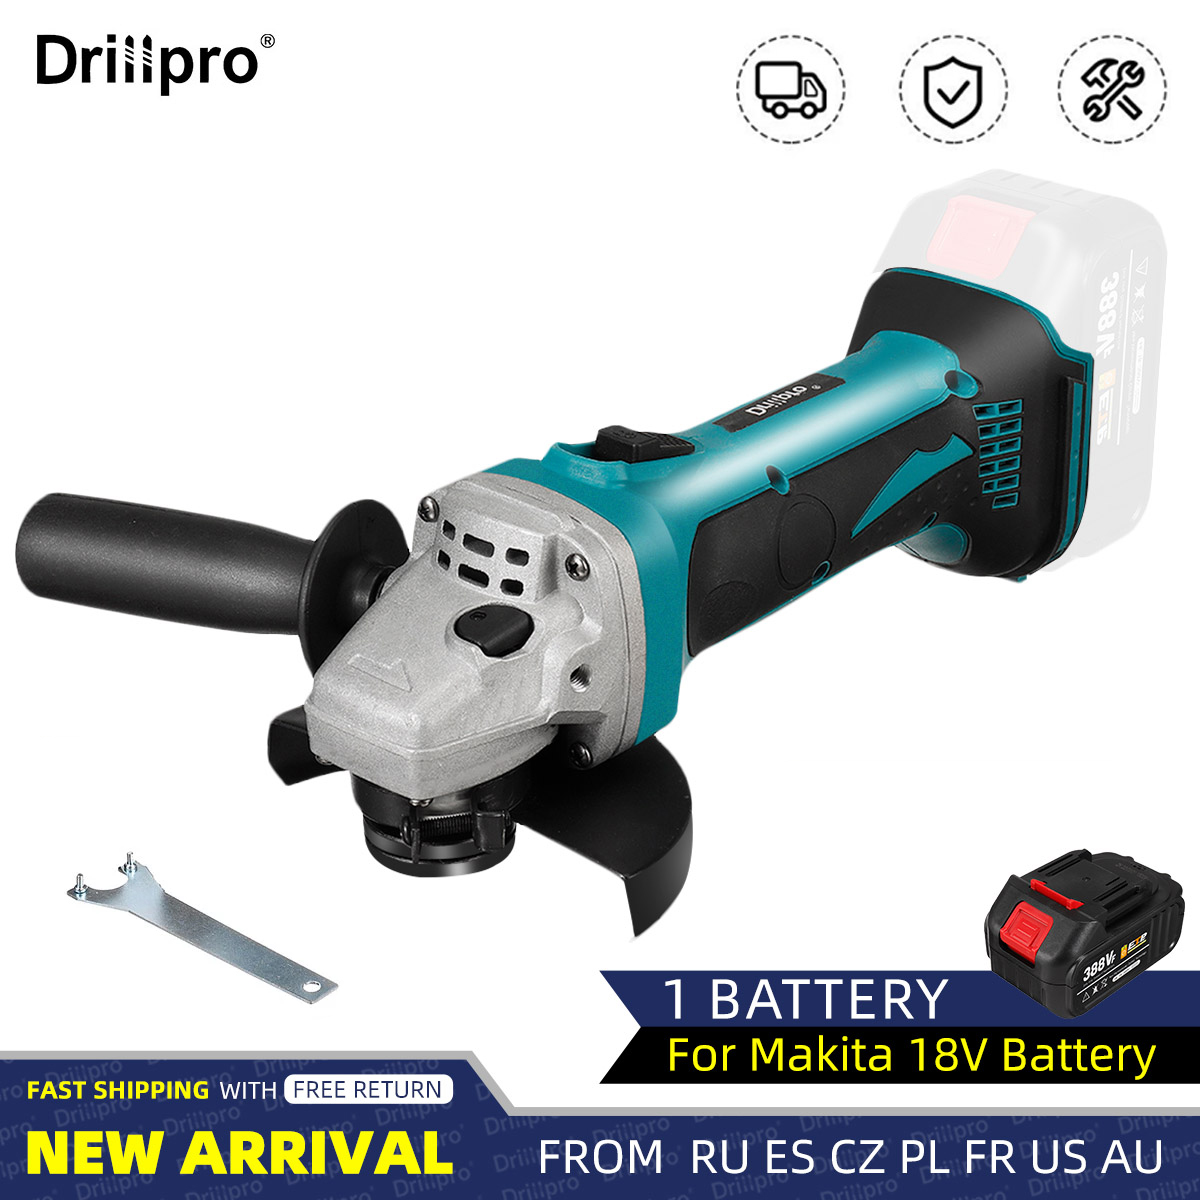 Drillpro-388VF-125mm-BlueBalck-Brushless-Motor-8500rpm-800W-Compact-Lithium-Electric-Polisher-1962696-1